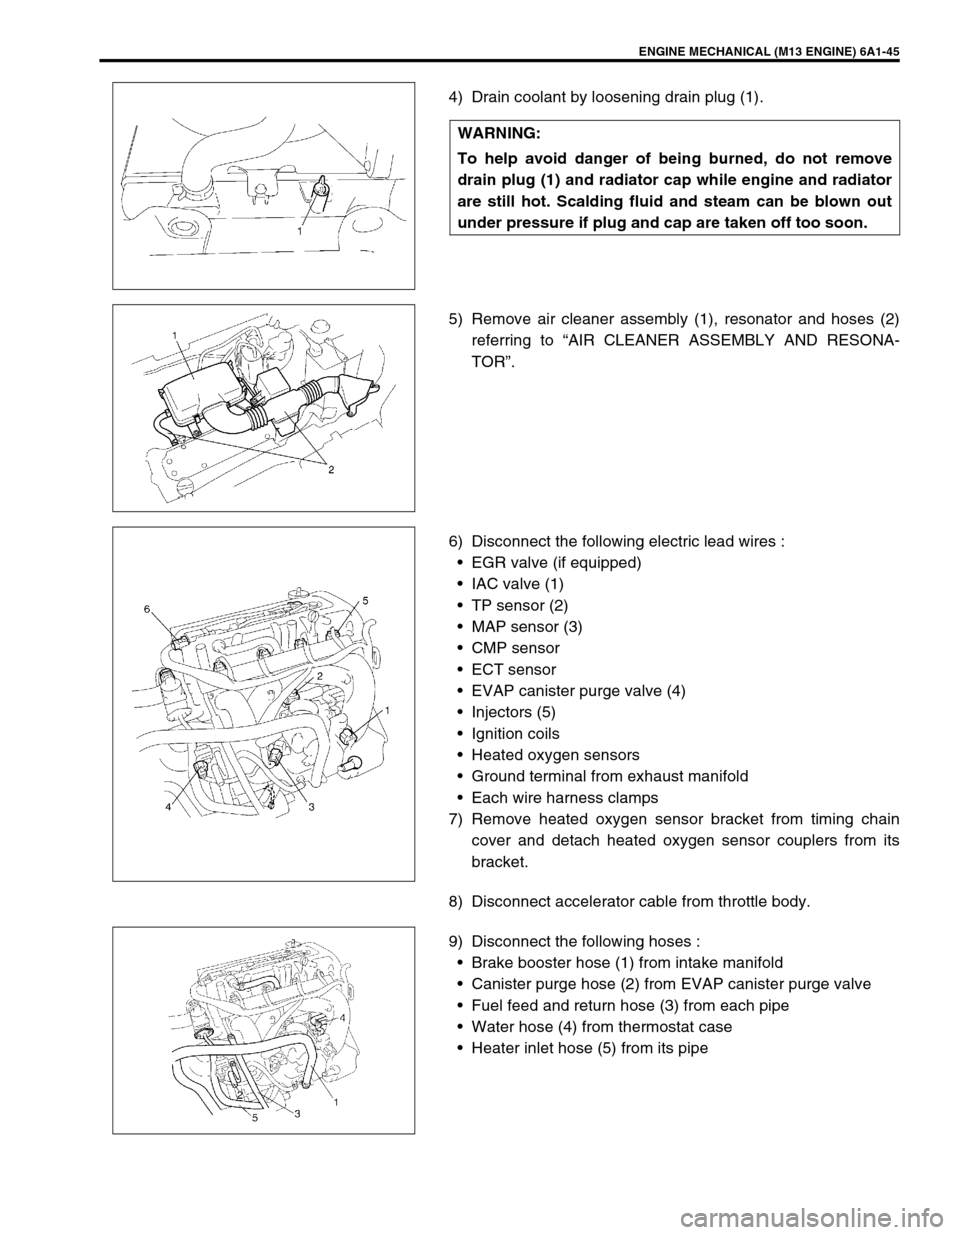 SUZUKI SWIFT 2000 1.G RG413 Service Owners Guide ENGINE MECHANICAL (M13 ENGINE) 6A1-45
4) Drain coolant by loosening drain plug (1).
5) Remove air cleaner assembly (1), resonator and hoses (2)
referring to “AIR CLEANER ASSEMBLY AND RESONA-
TOR”.